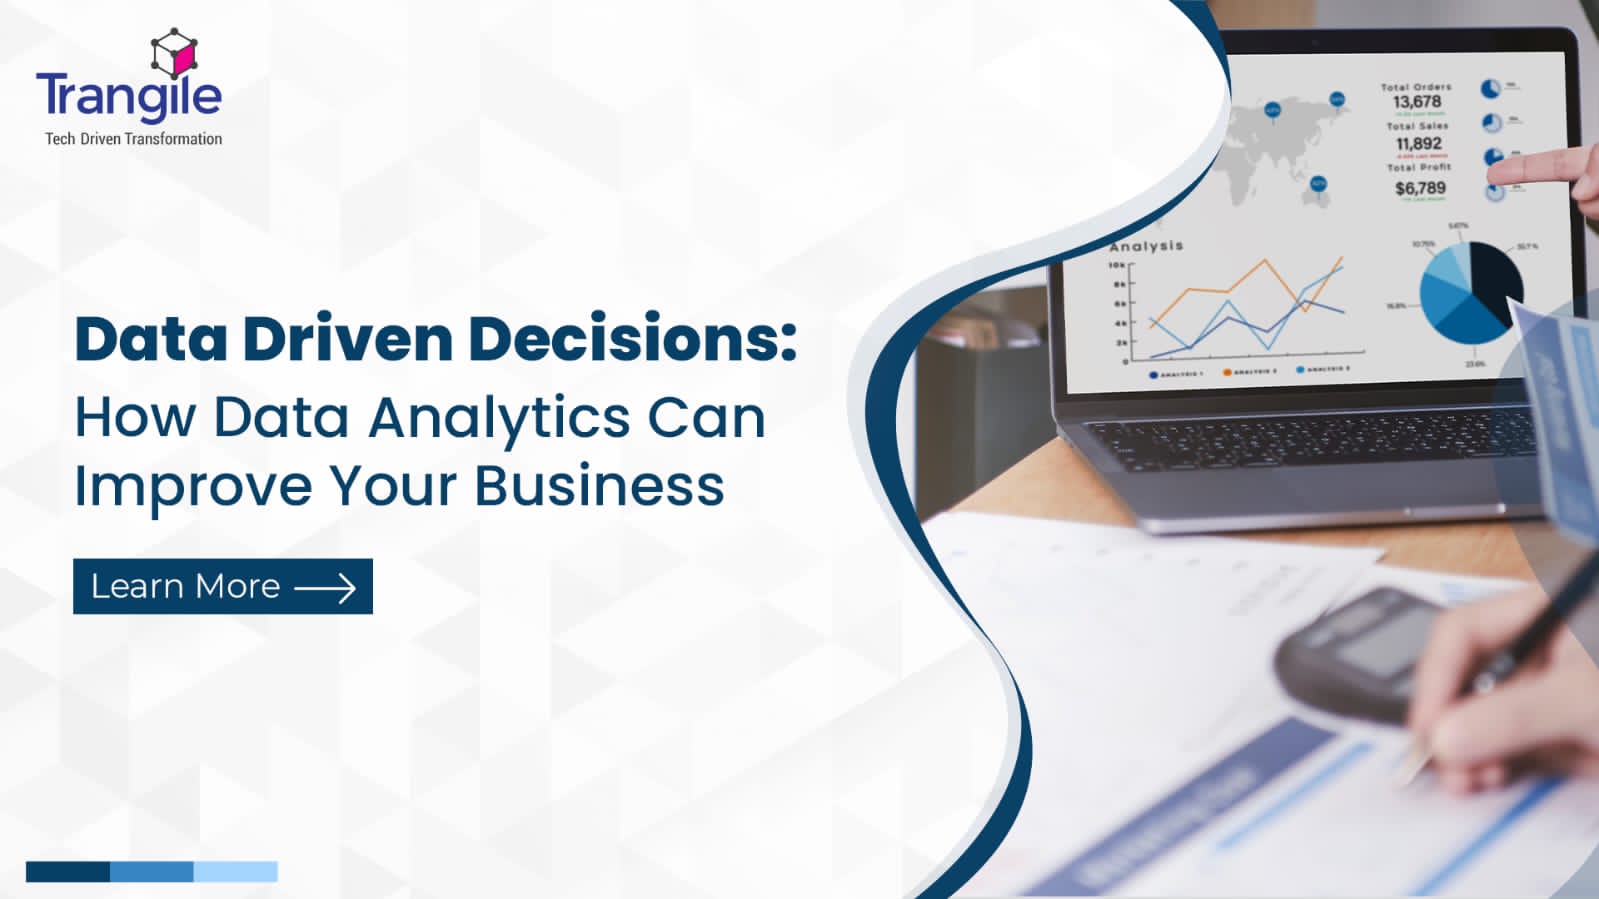 Data Driven Decisions: How Data Analytics Can Improve Your Business?